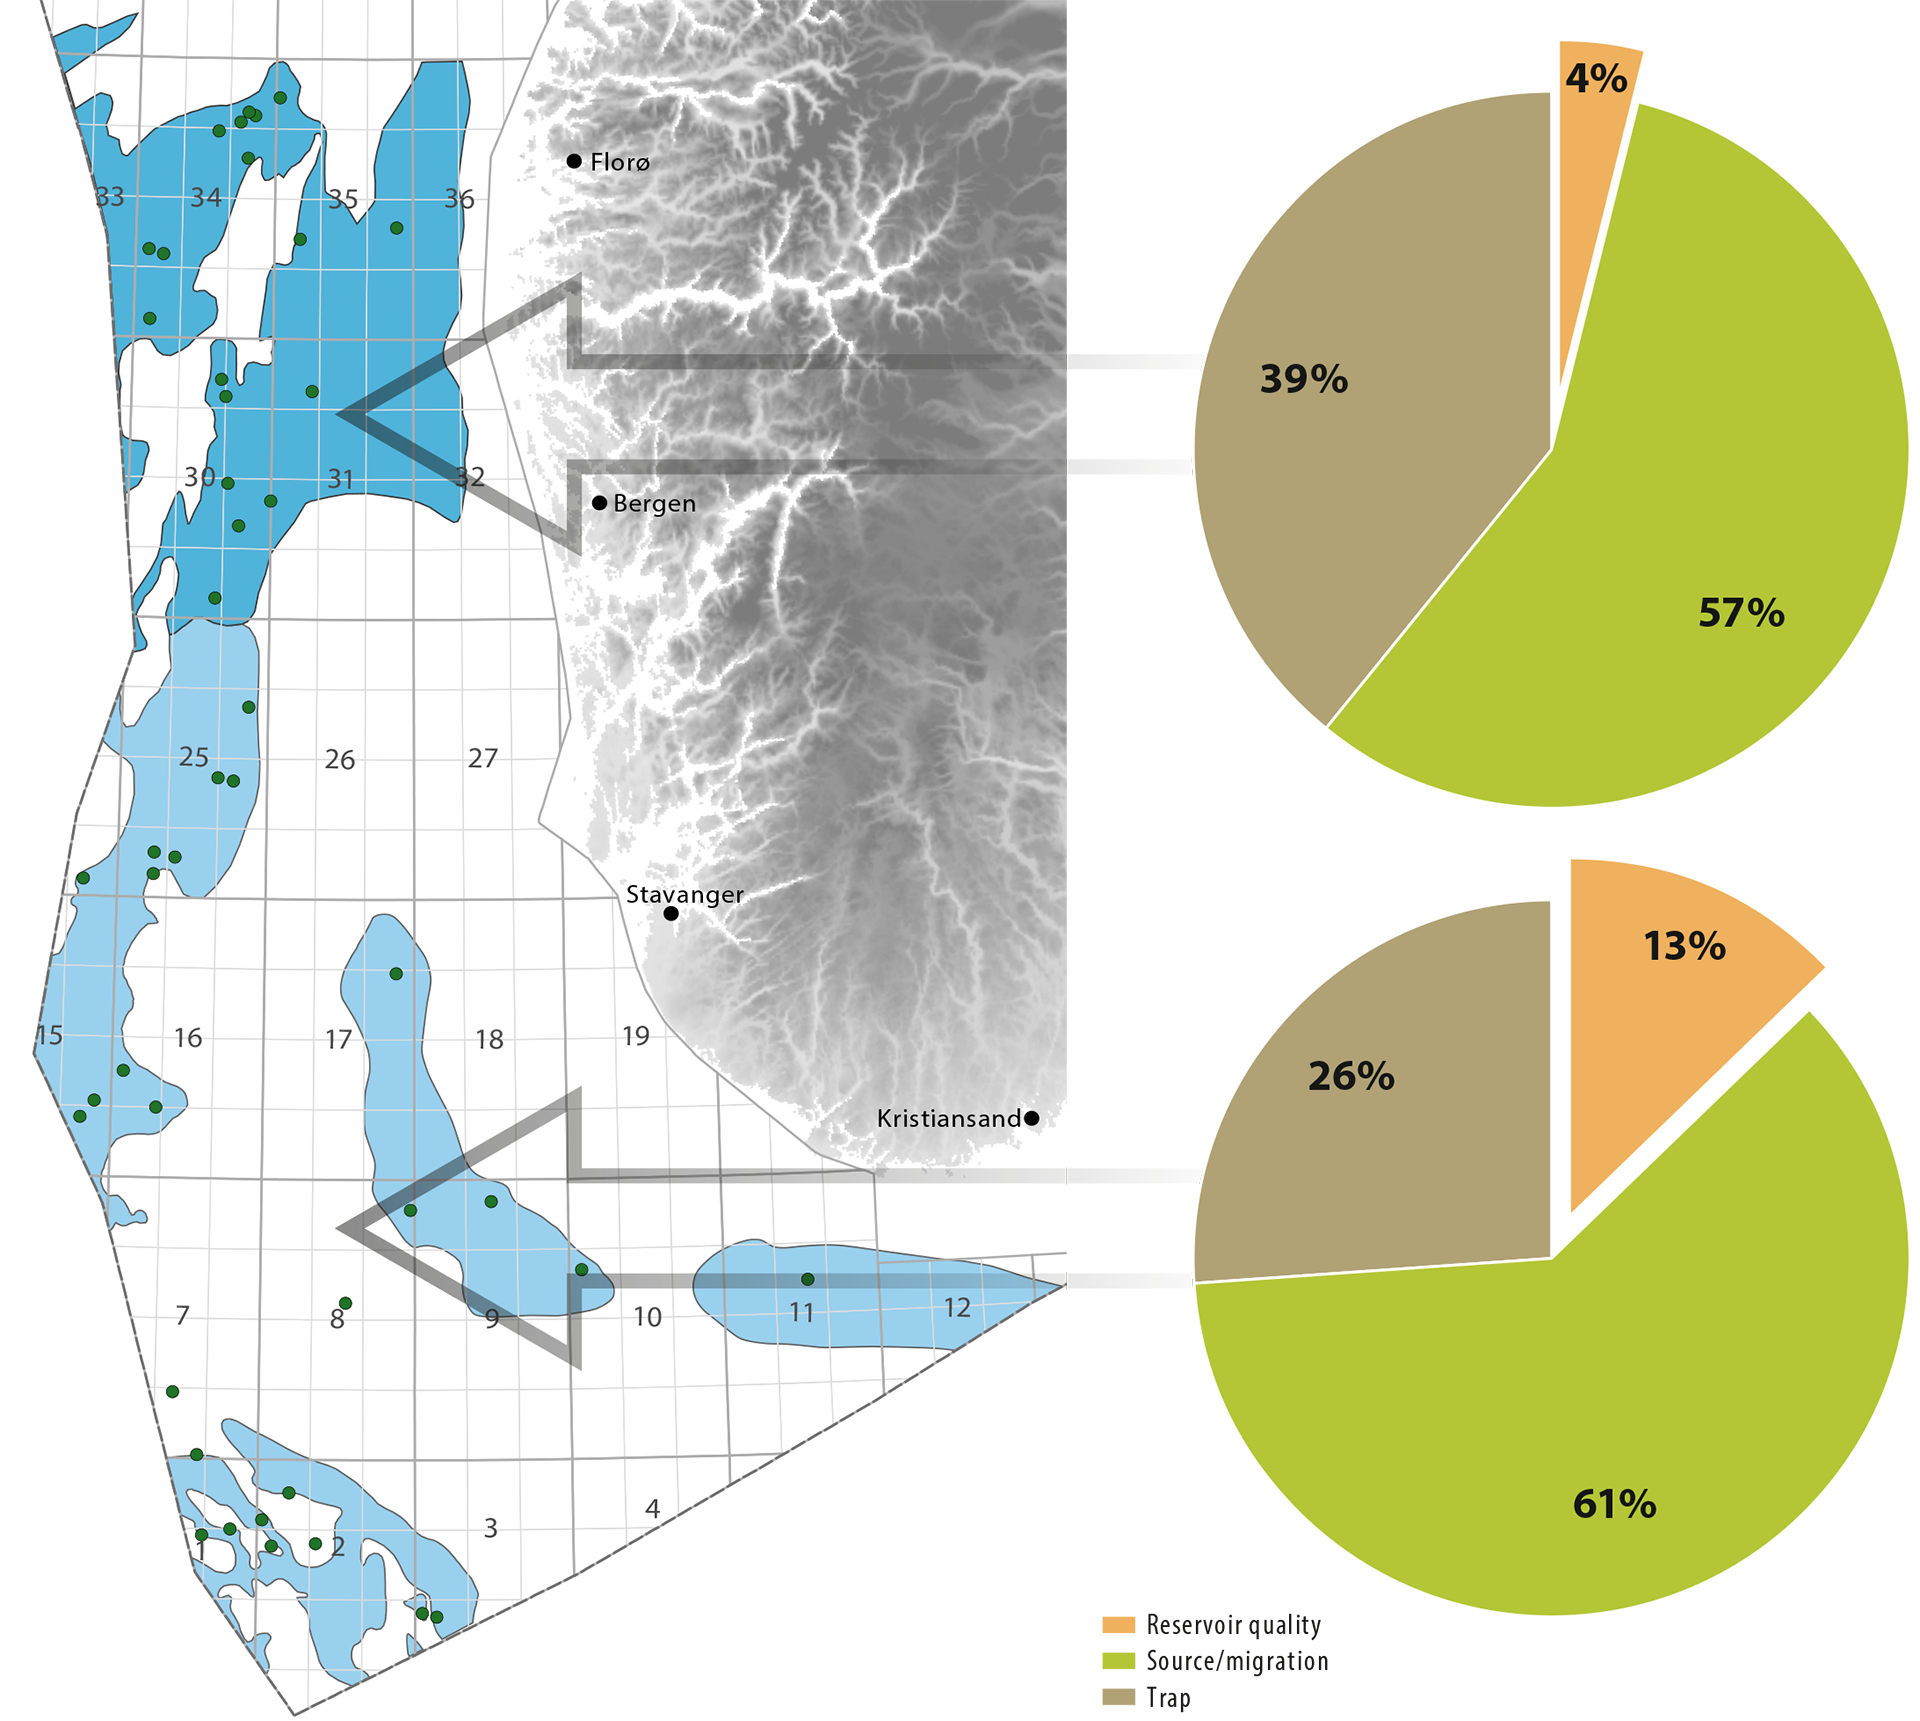 Figure 7.10. Extent of Upper Triassic to Middle Jurassic plays in the North Sea